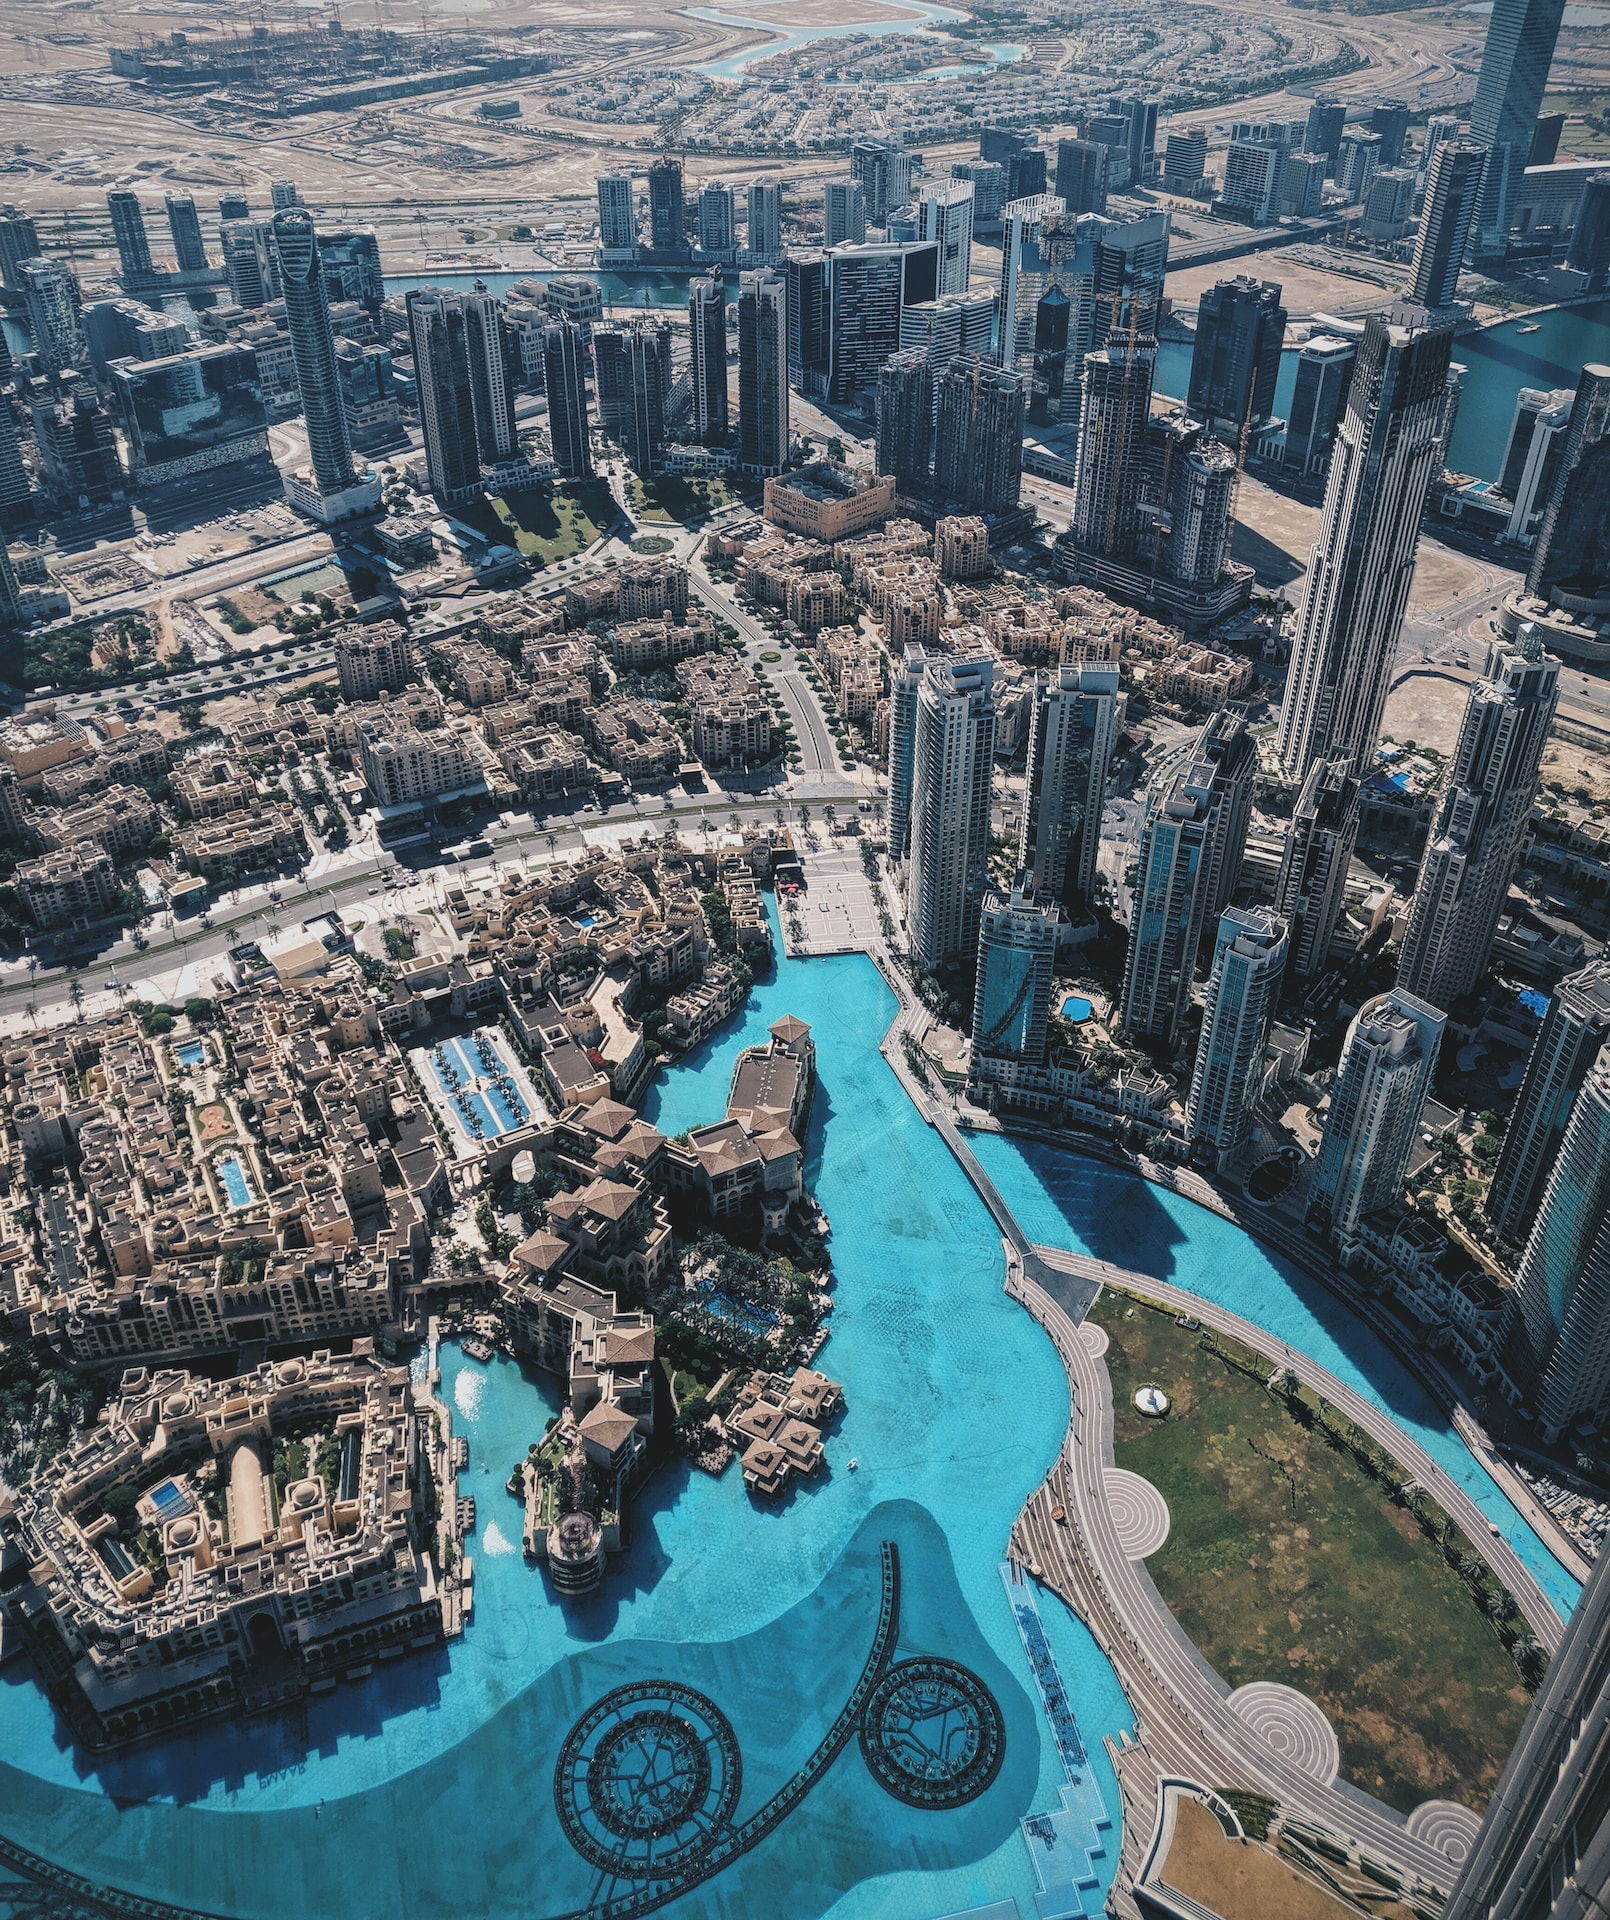 How do I become a real estate agent in UAE?